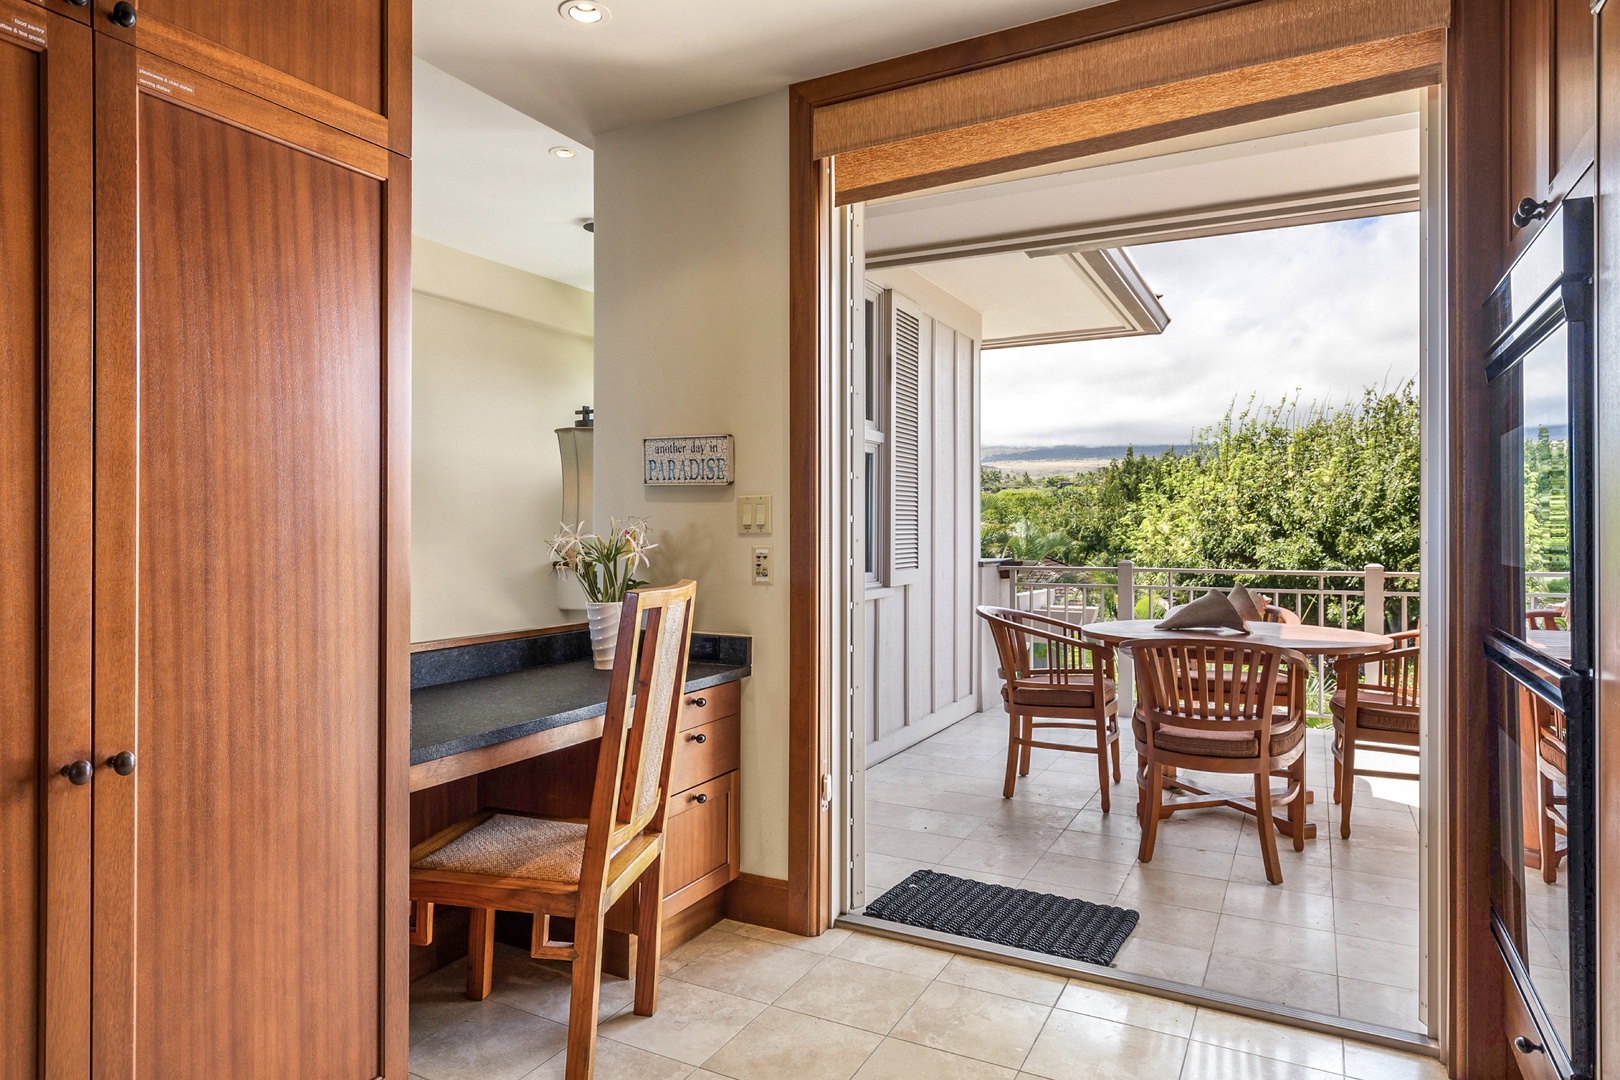 Kailua Kona Vacation Rentals, 3BD Ka'Ulu Villa (131C) at Four Seasons Resort at Hualalai - Closer view of sunny breakfast area and bonus deck, with an office nook if you absolutely must work during your stay!